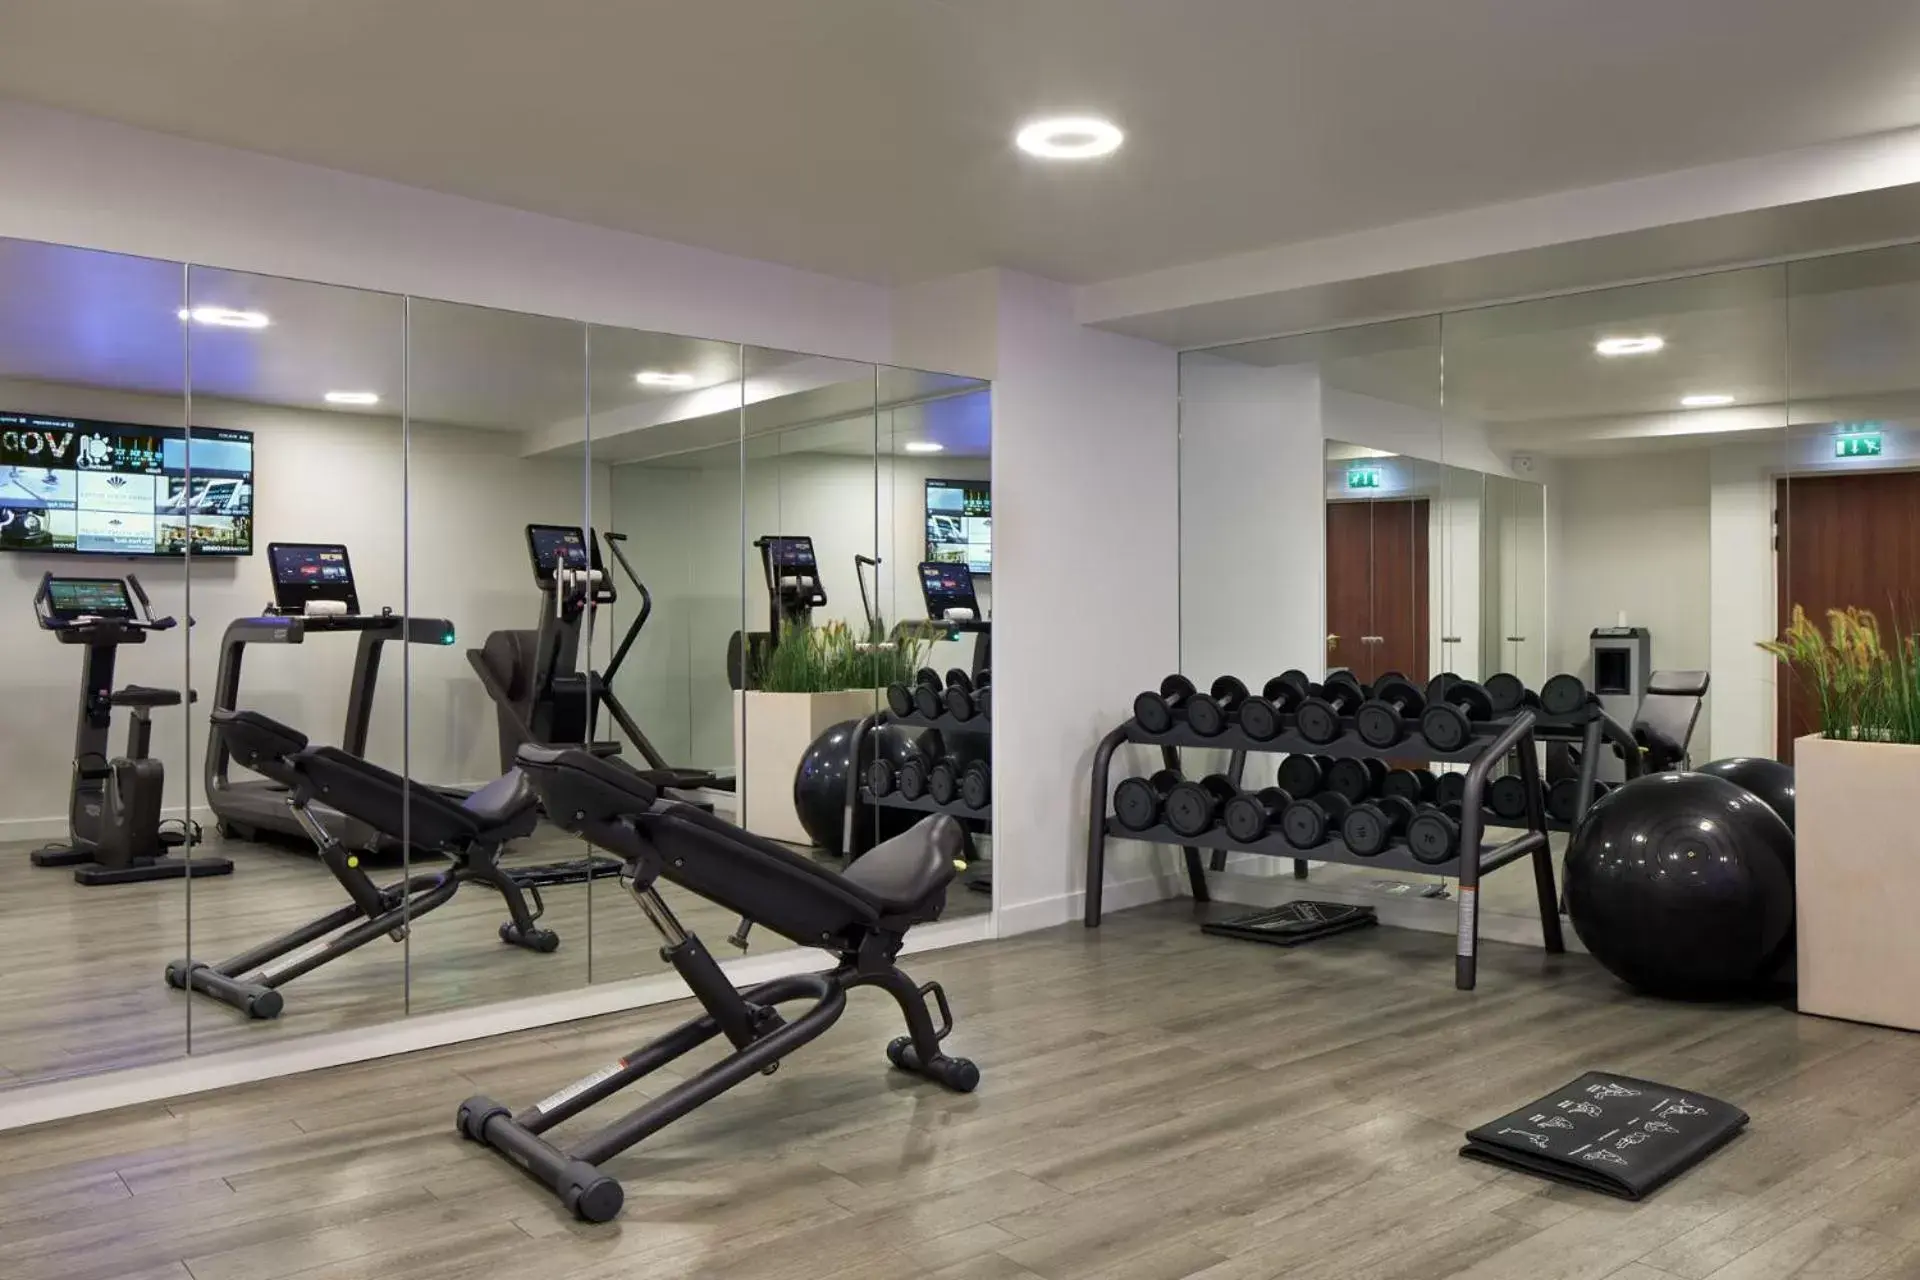 Fitness centre/facilities, Fitness Center/Facilities in Maison Albar Hotels Le Pont-Neuf